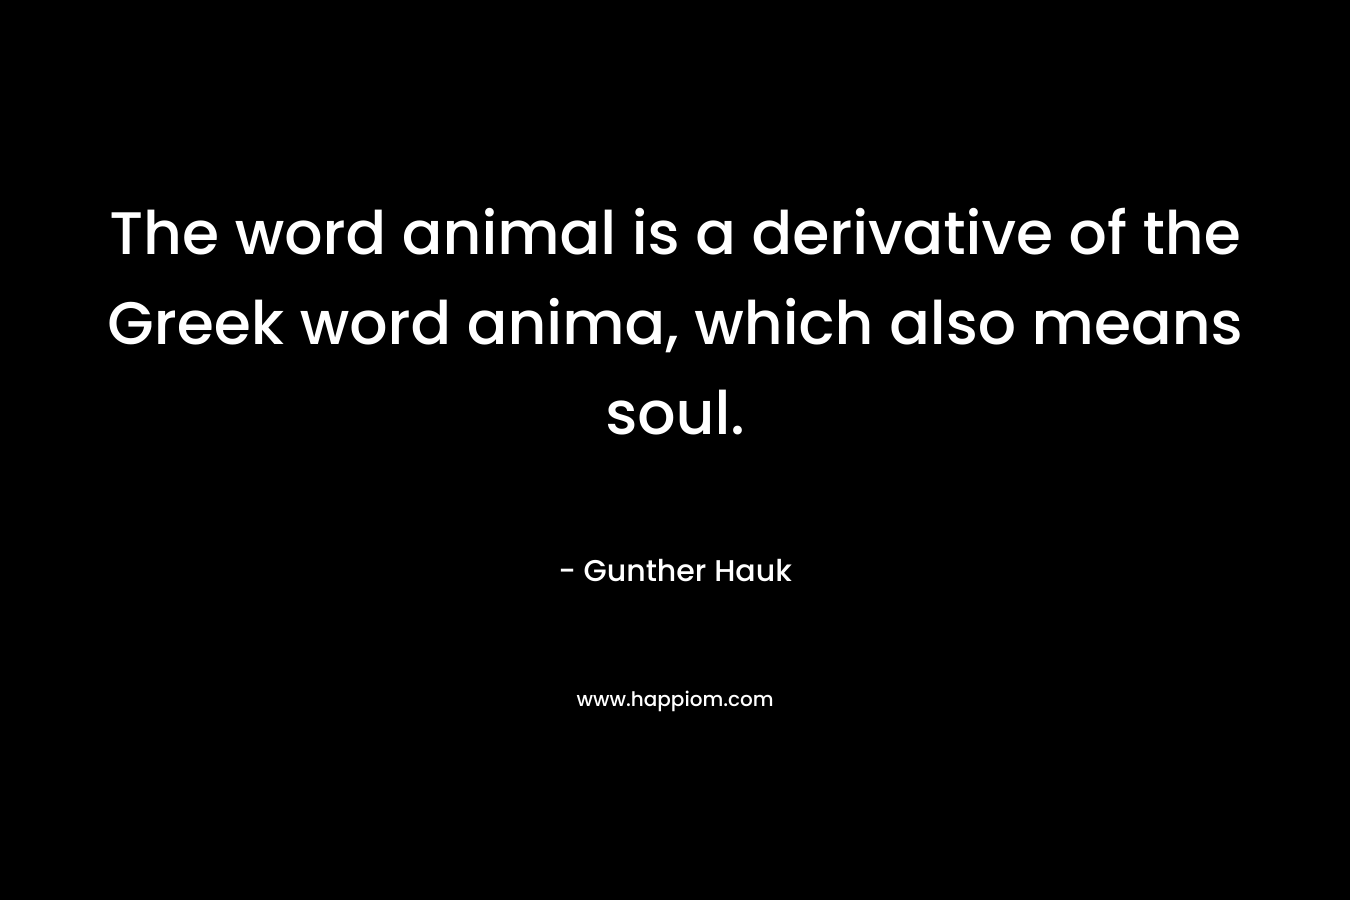 The word animal is a derivative of the Greek word anima, which also means soul.